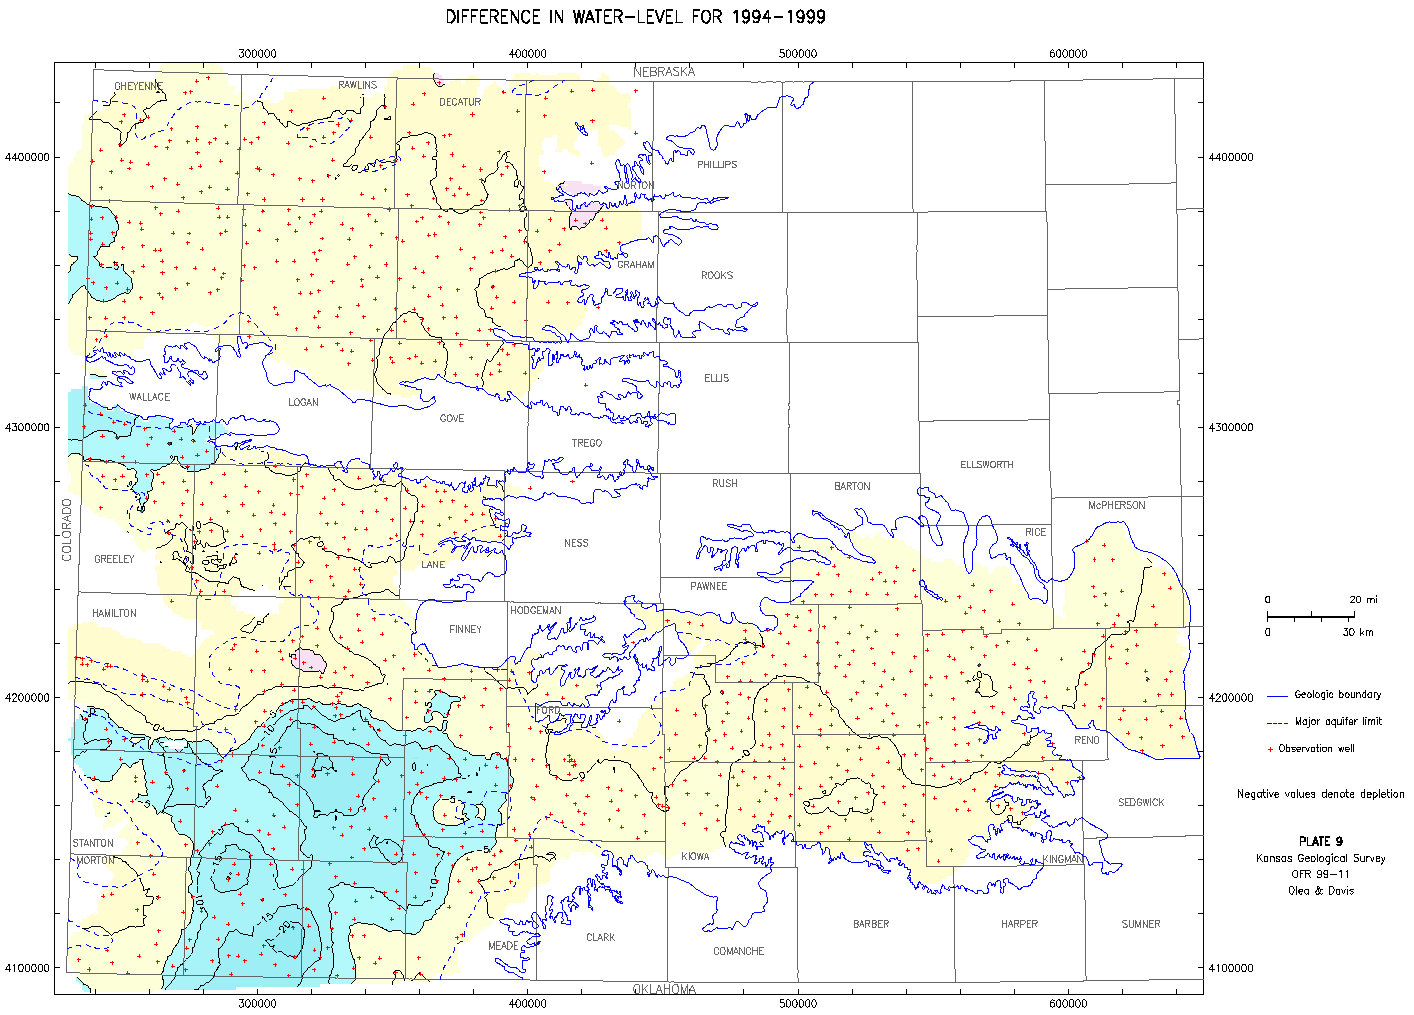 Difference in Water Level, 1994-1999